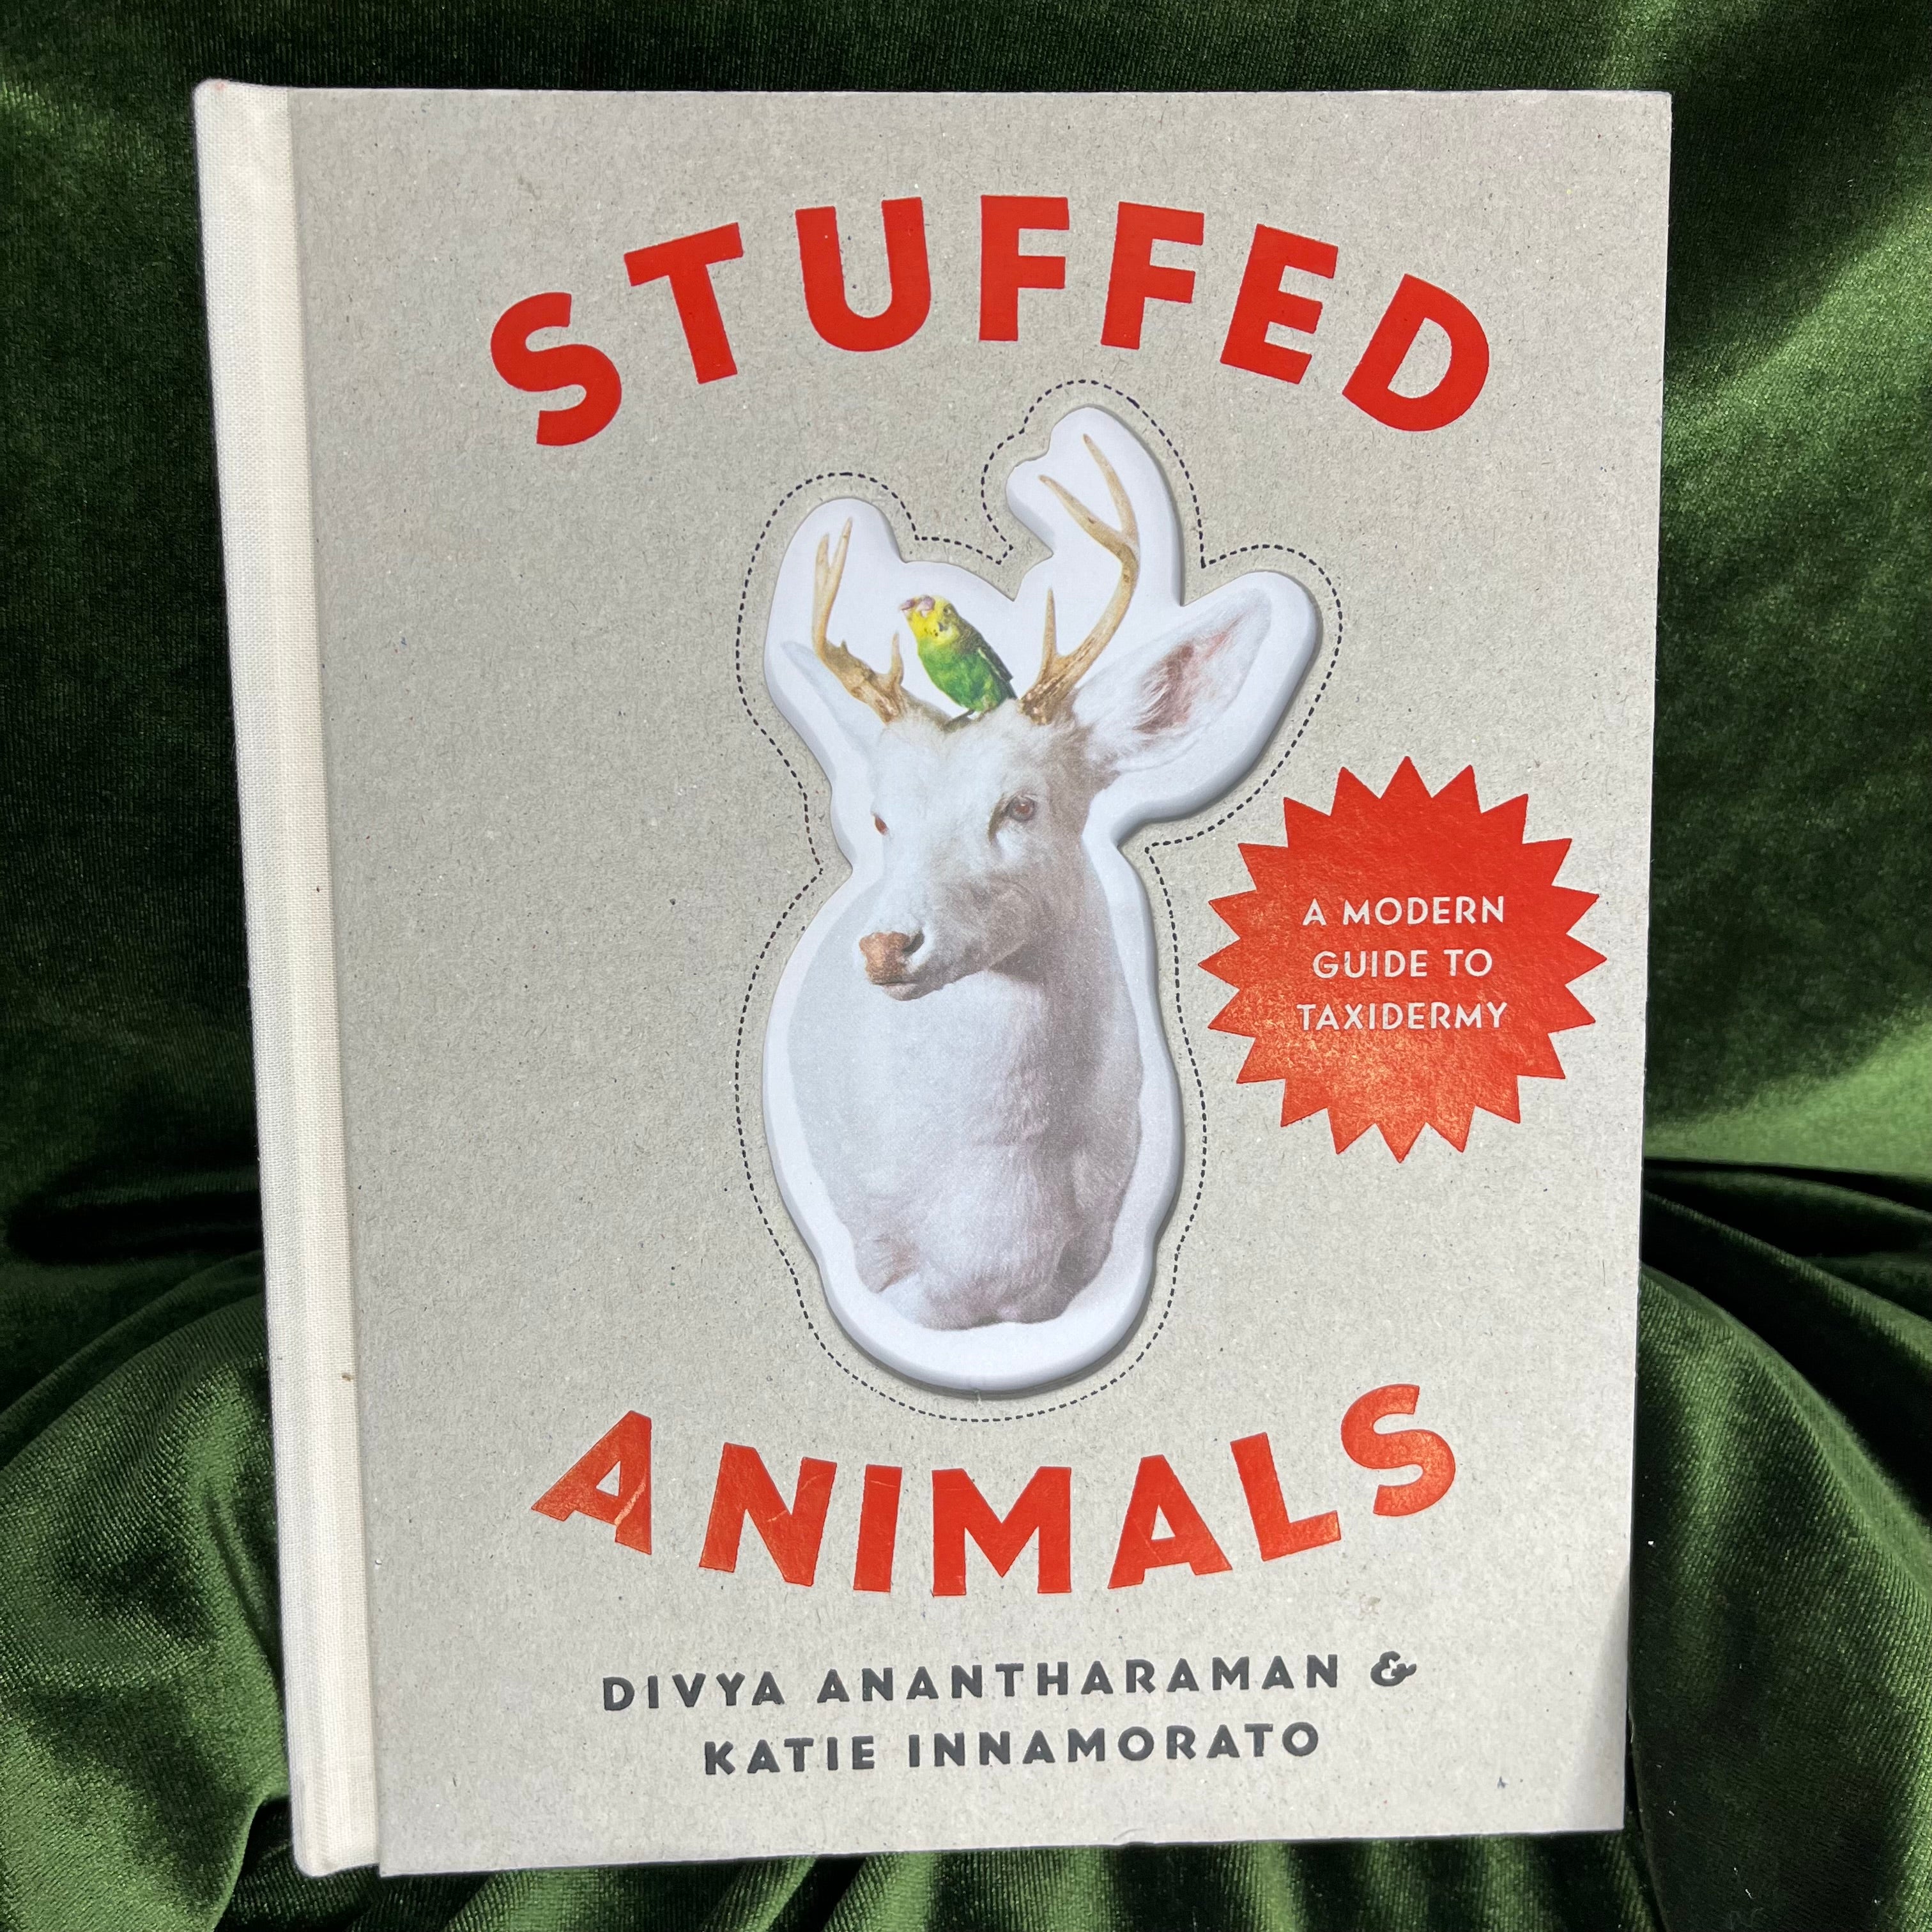 Stuffed Animals: A Modern Guide to Taxidermy by Divya Anantharaman and